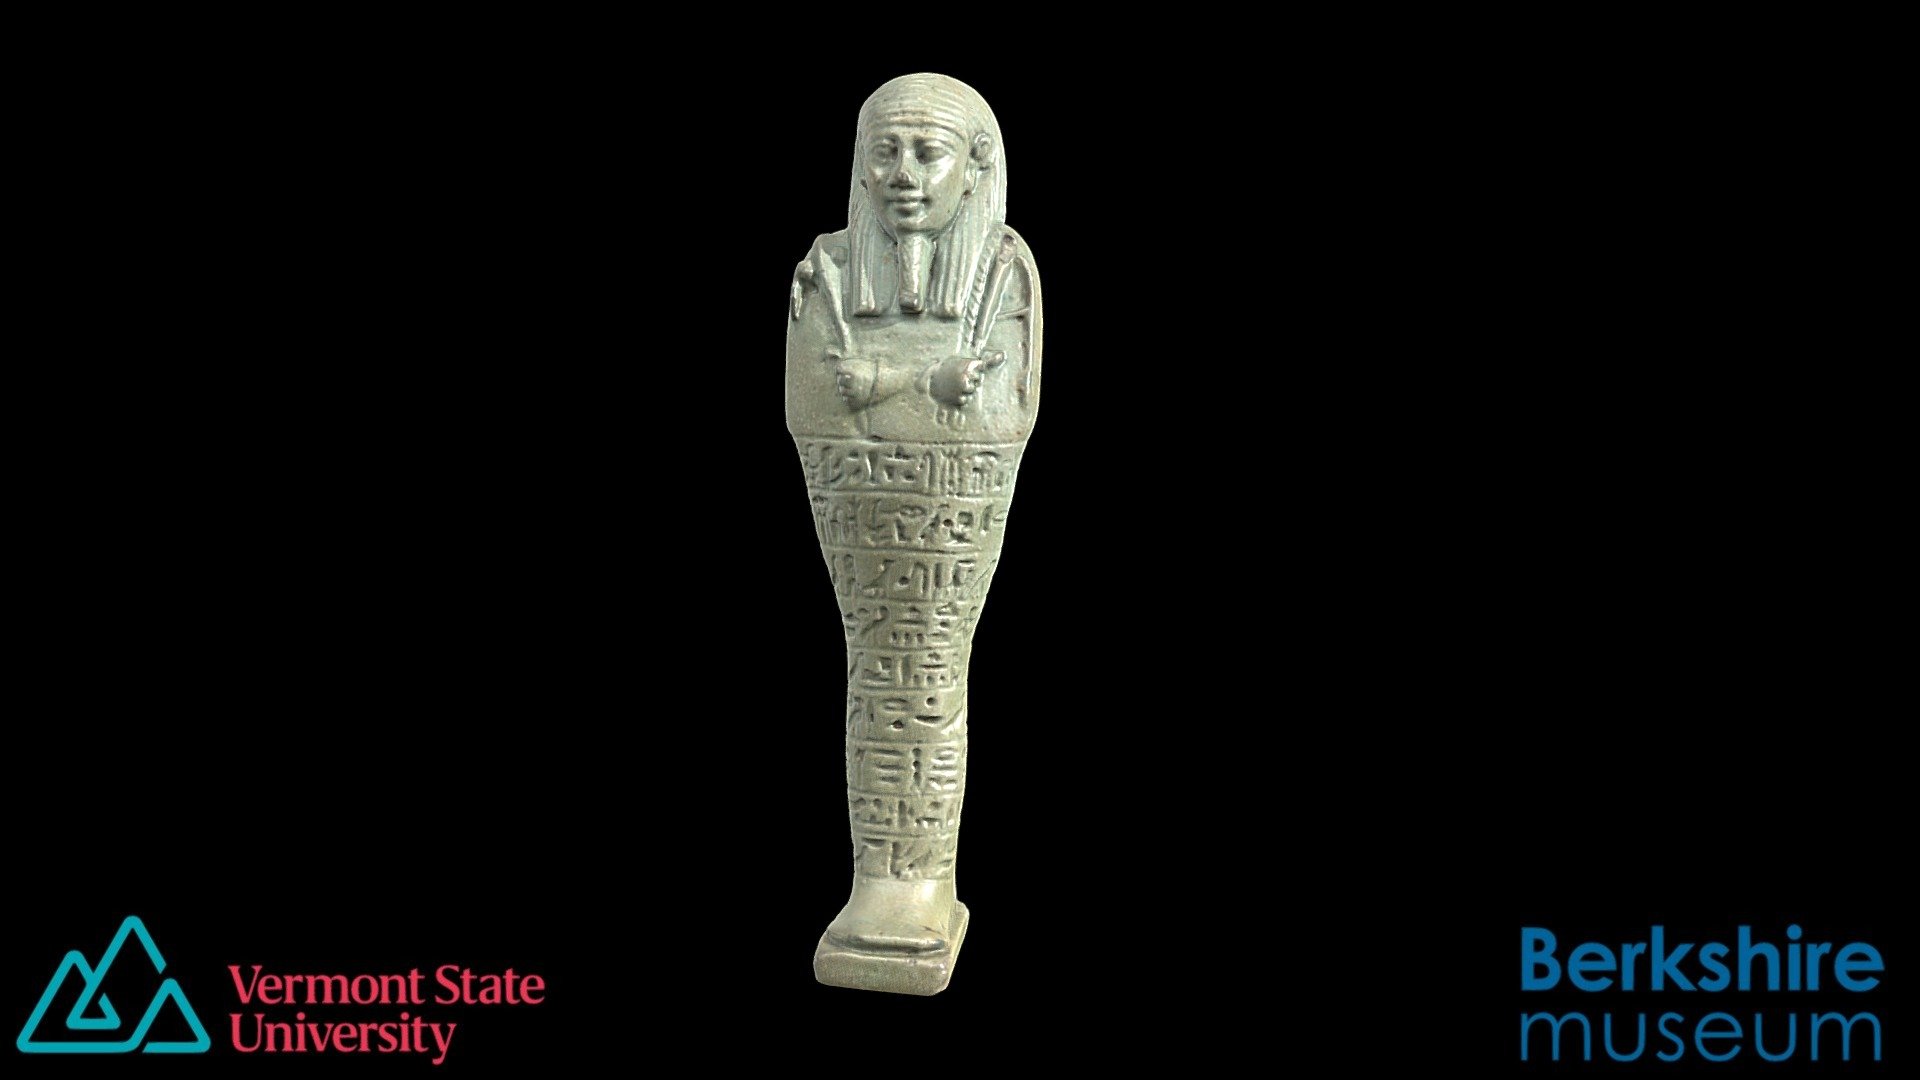 Shabti, Collection of the Berkshire Museum (1905.6.2). Shabti of Amose, Royal Scribe. Dynasty 30 of Egypt. Faience. Gift of Zenas Crane. Length: 7.402 inches.  Translation provided: 